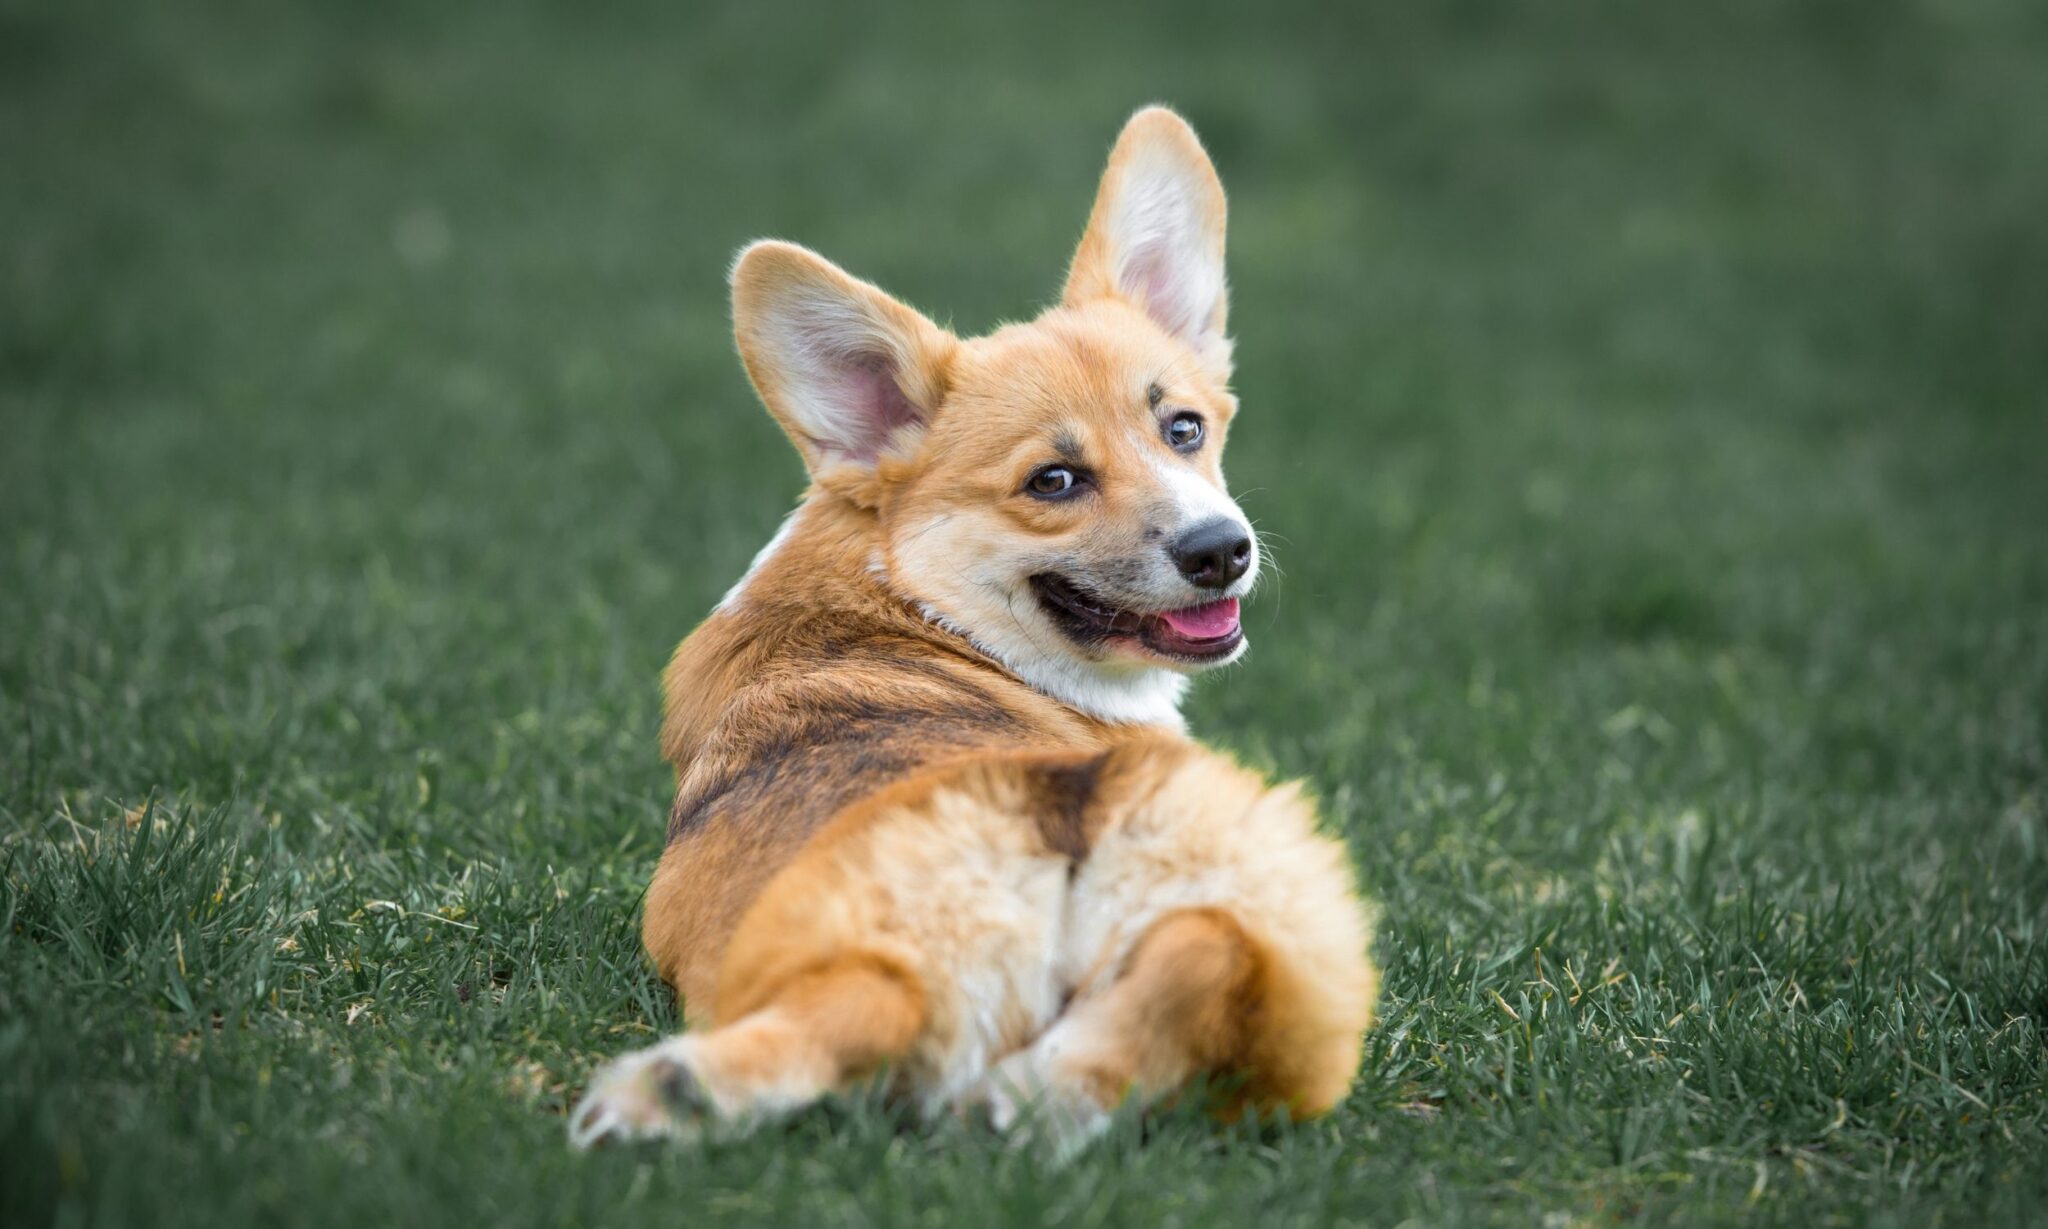 https://www.dogingtonpost.com/wp-content/uploads/2022/03/Heres-What-You-Need-to-Know-About-Corgis.jpg